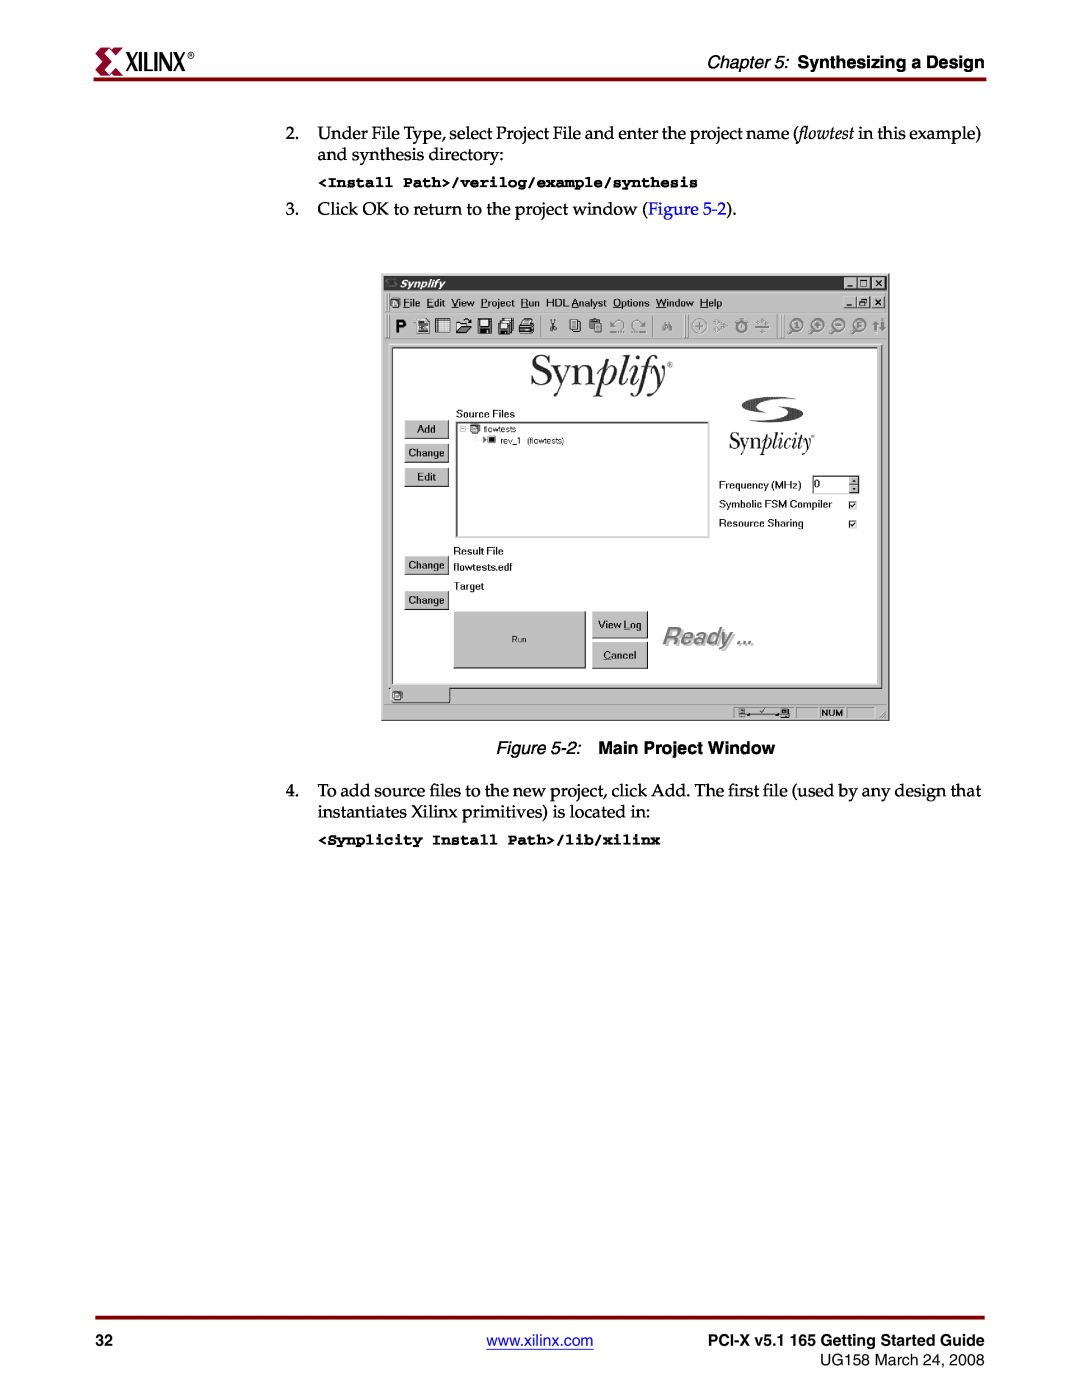 Xilinx PCI-X v5.1 manual Synthesizing a Design, 2 Main Project Window 